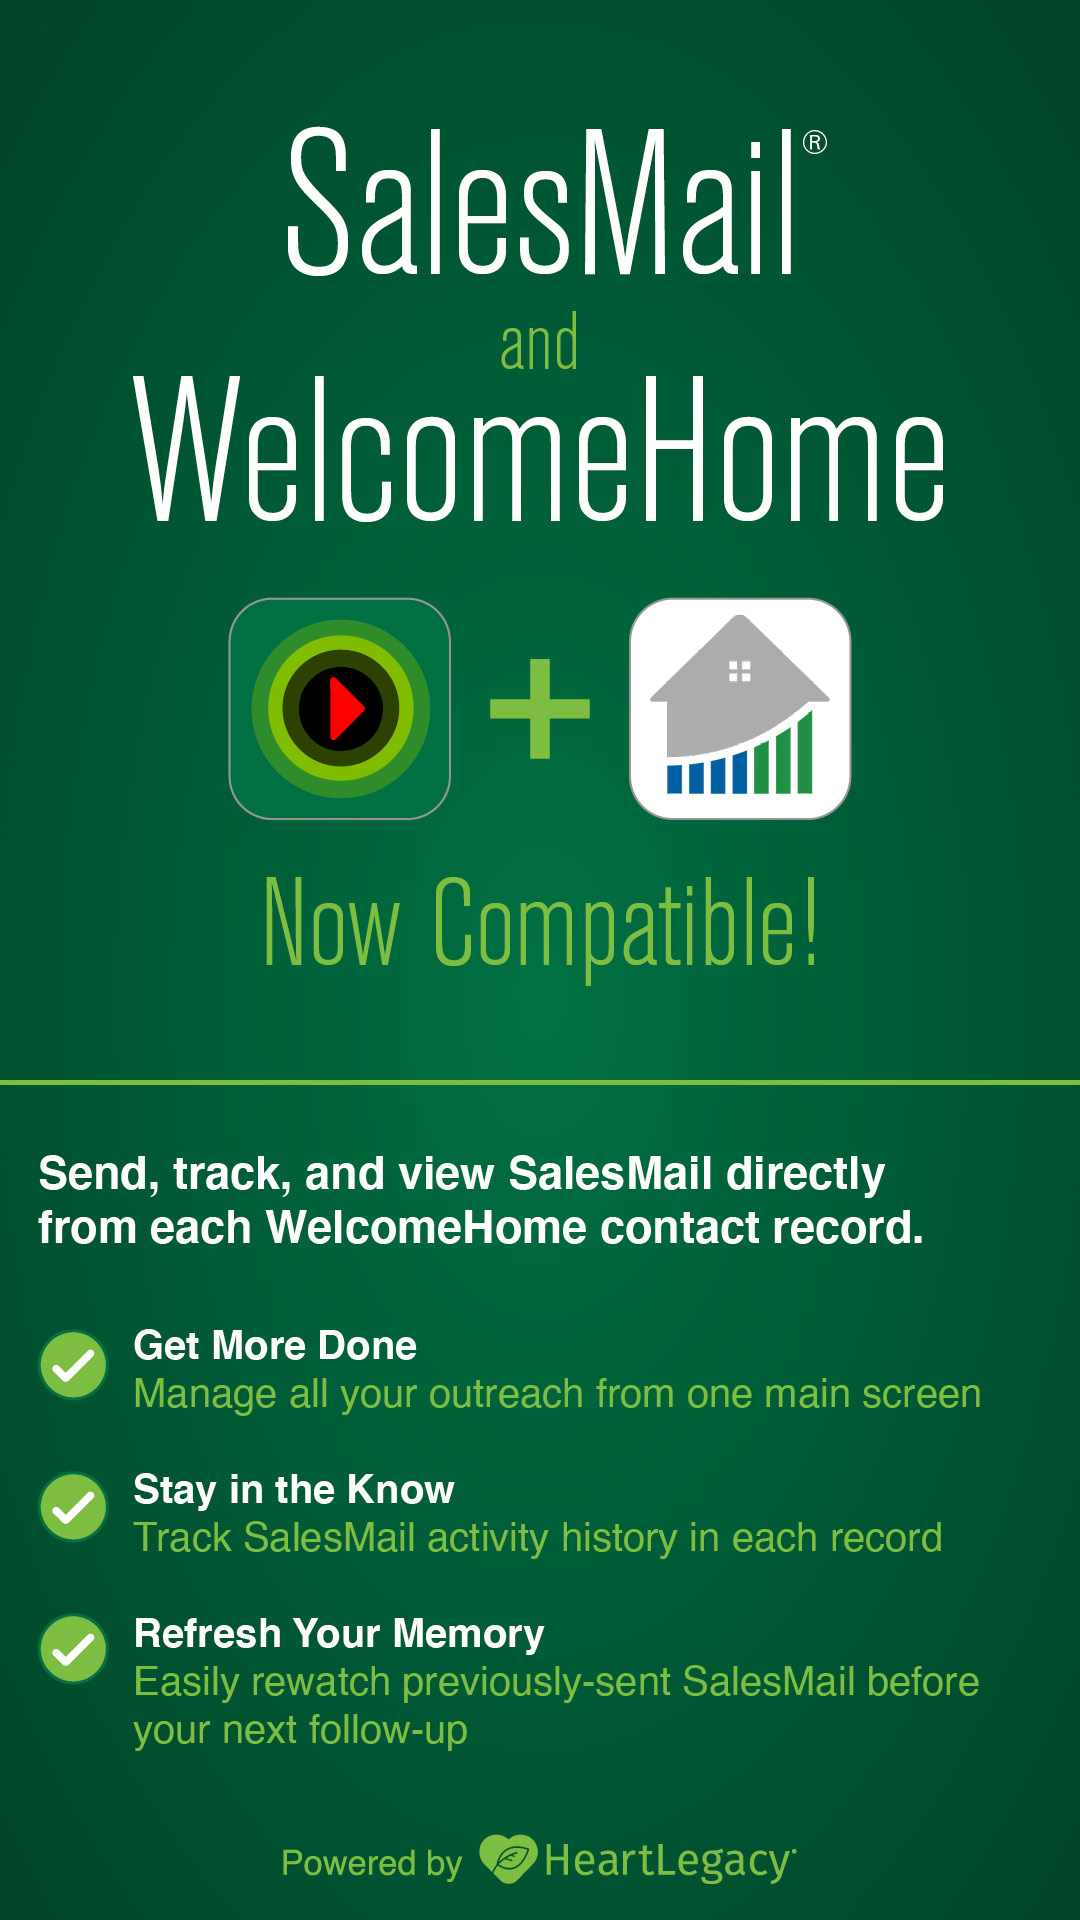 SM-WelcomeHome (Story)V2